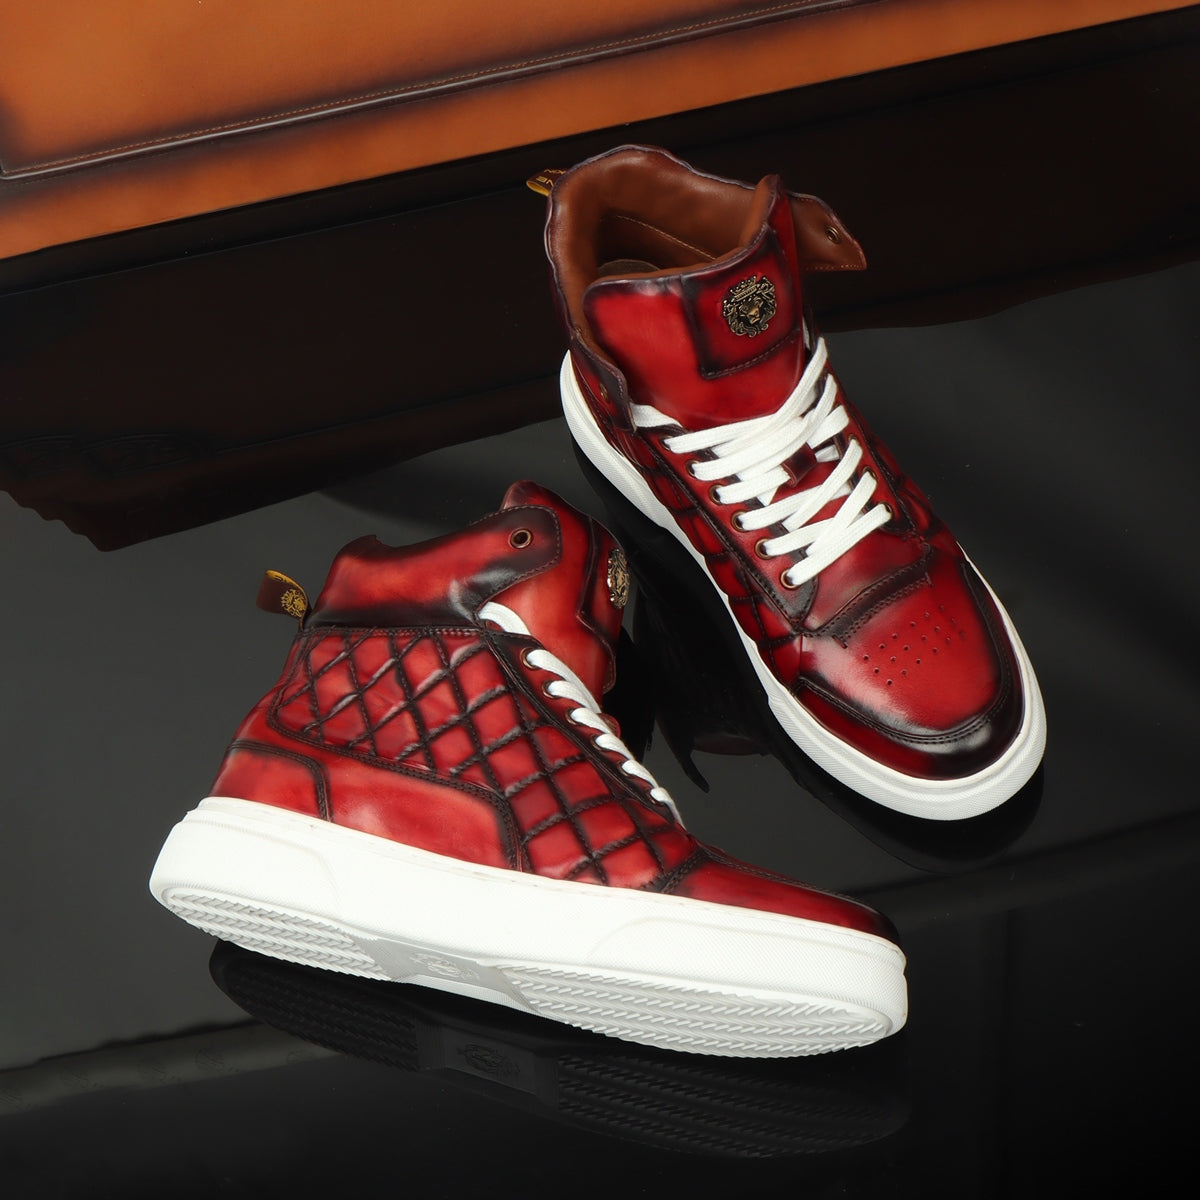 Diamond Stitch Mid-Top Sneaker on Blood Red Color by Brune & Bareskin